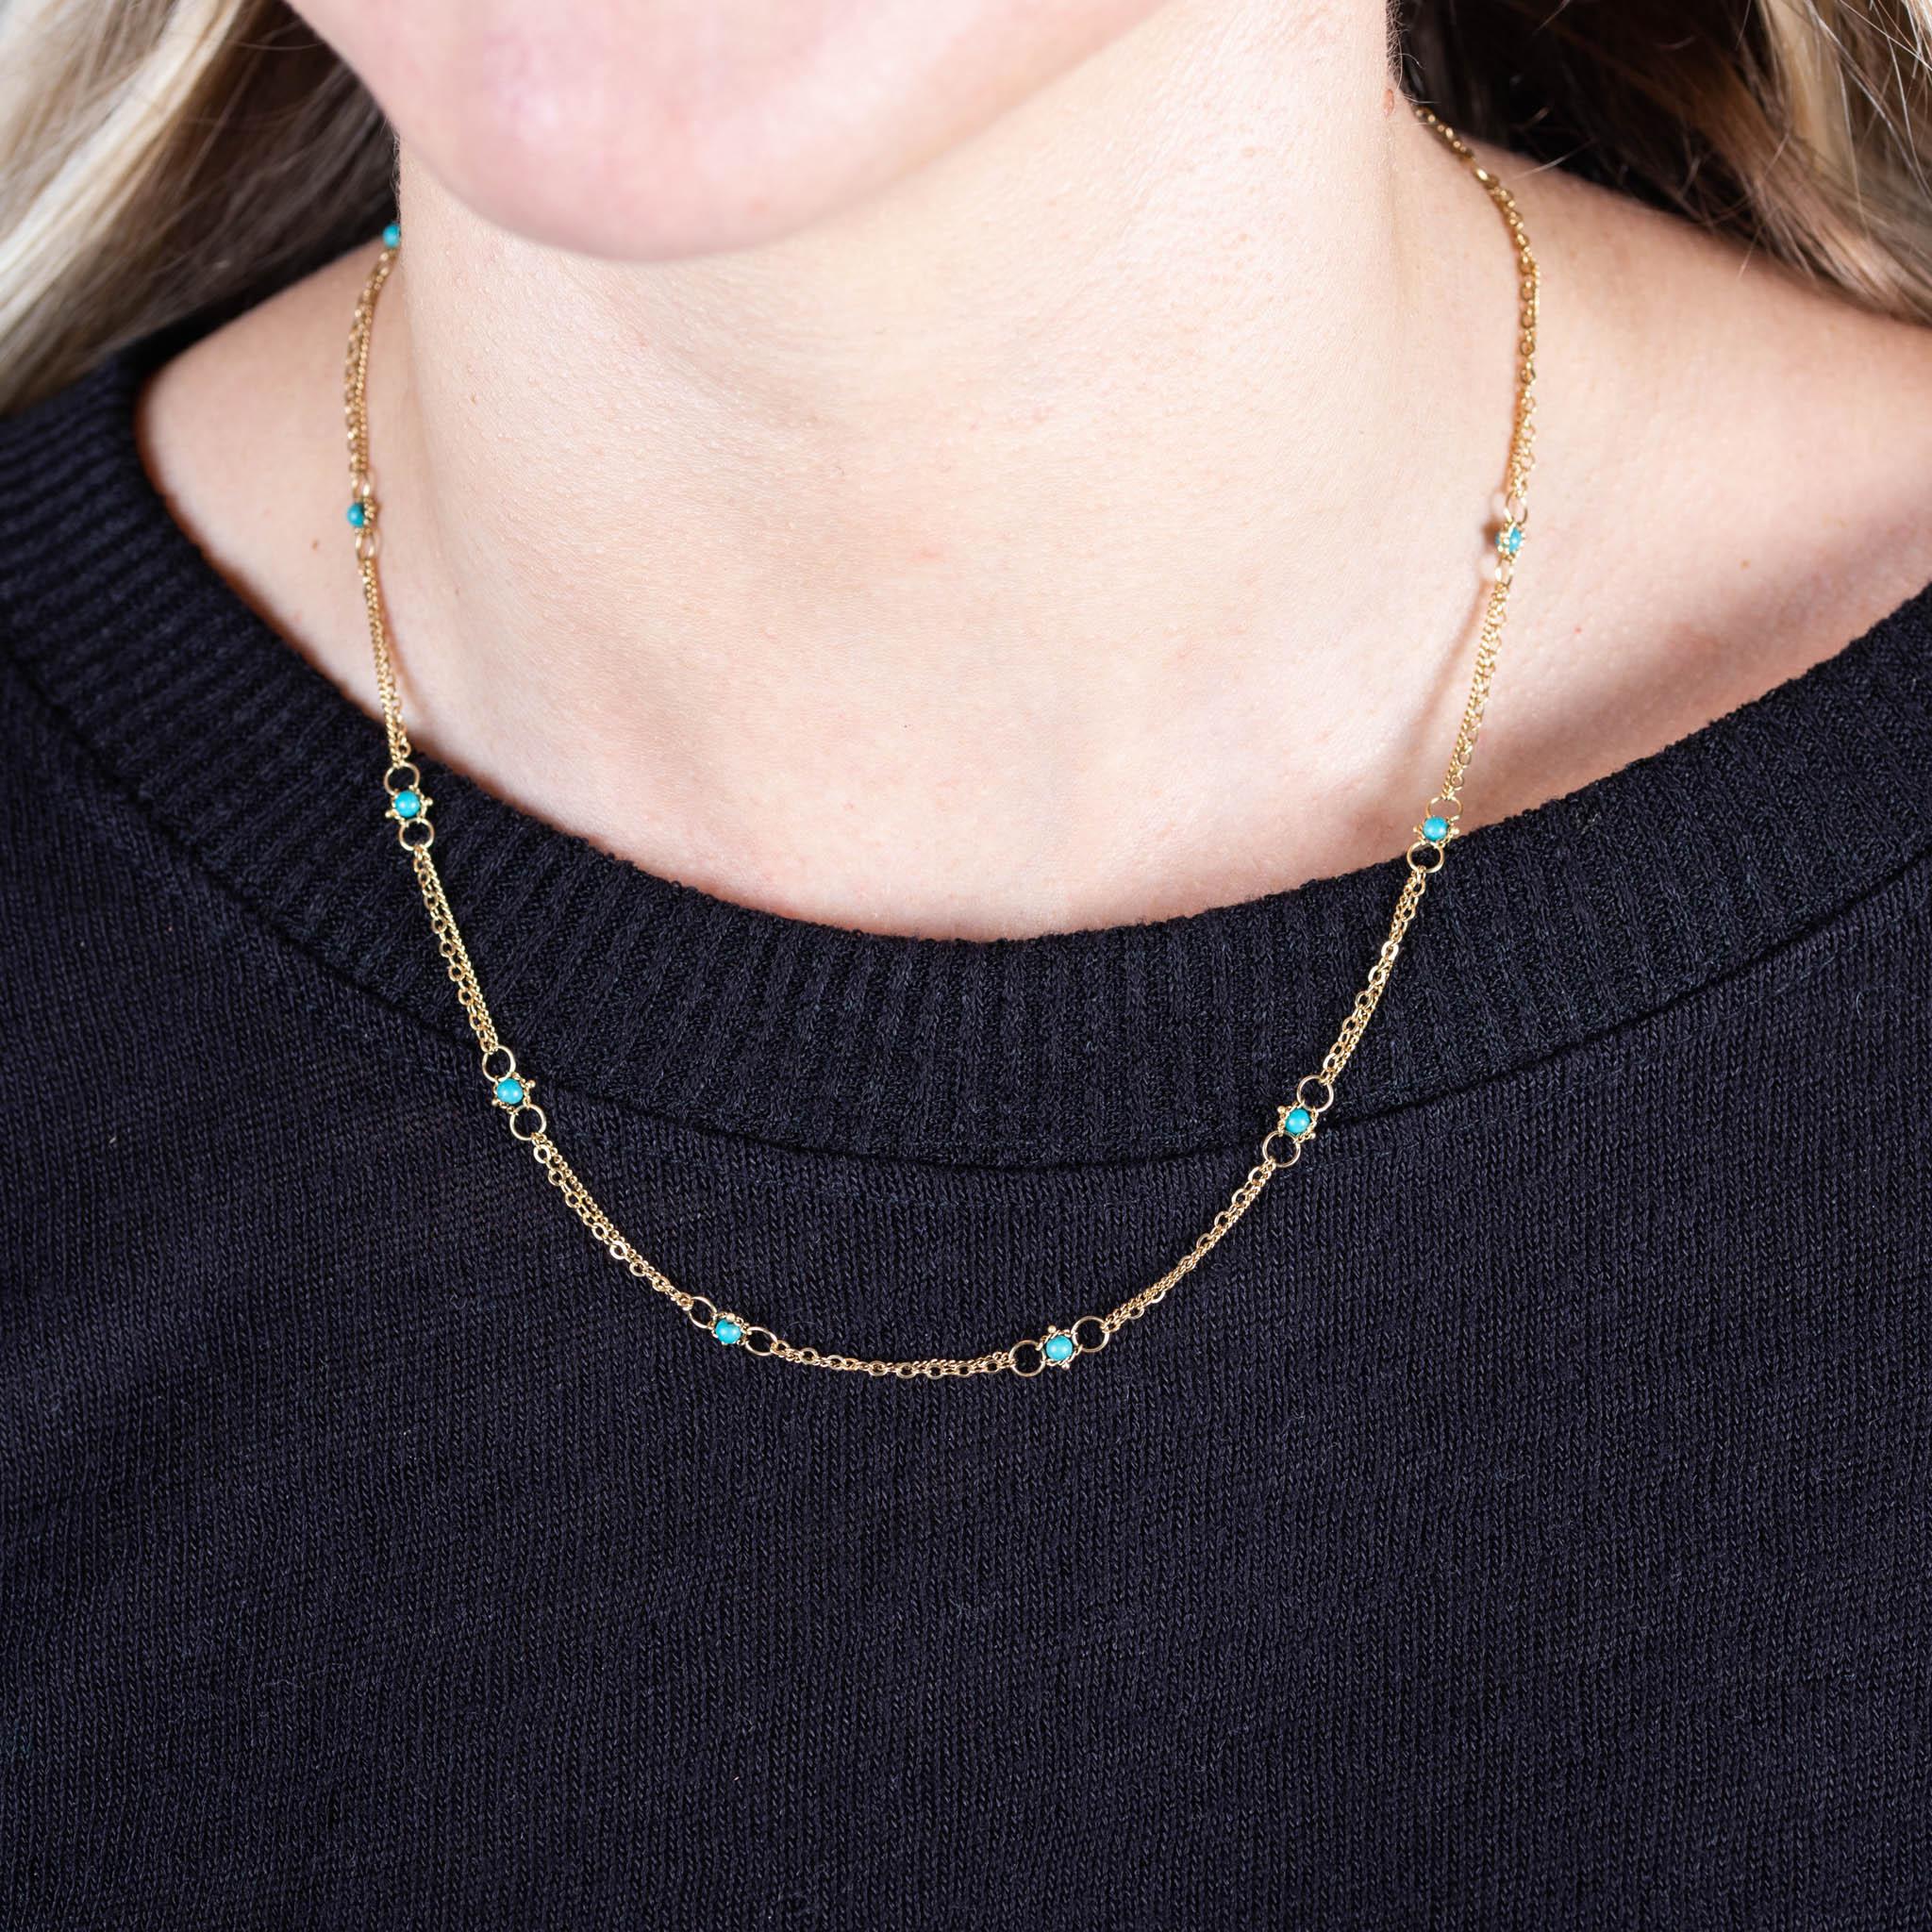 Whisper Chain Necklace in Turquoise In New Condition For Sale In Chapel Hill, NC